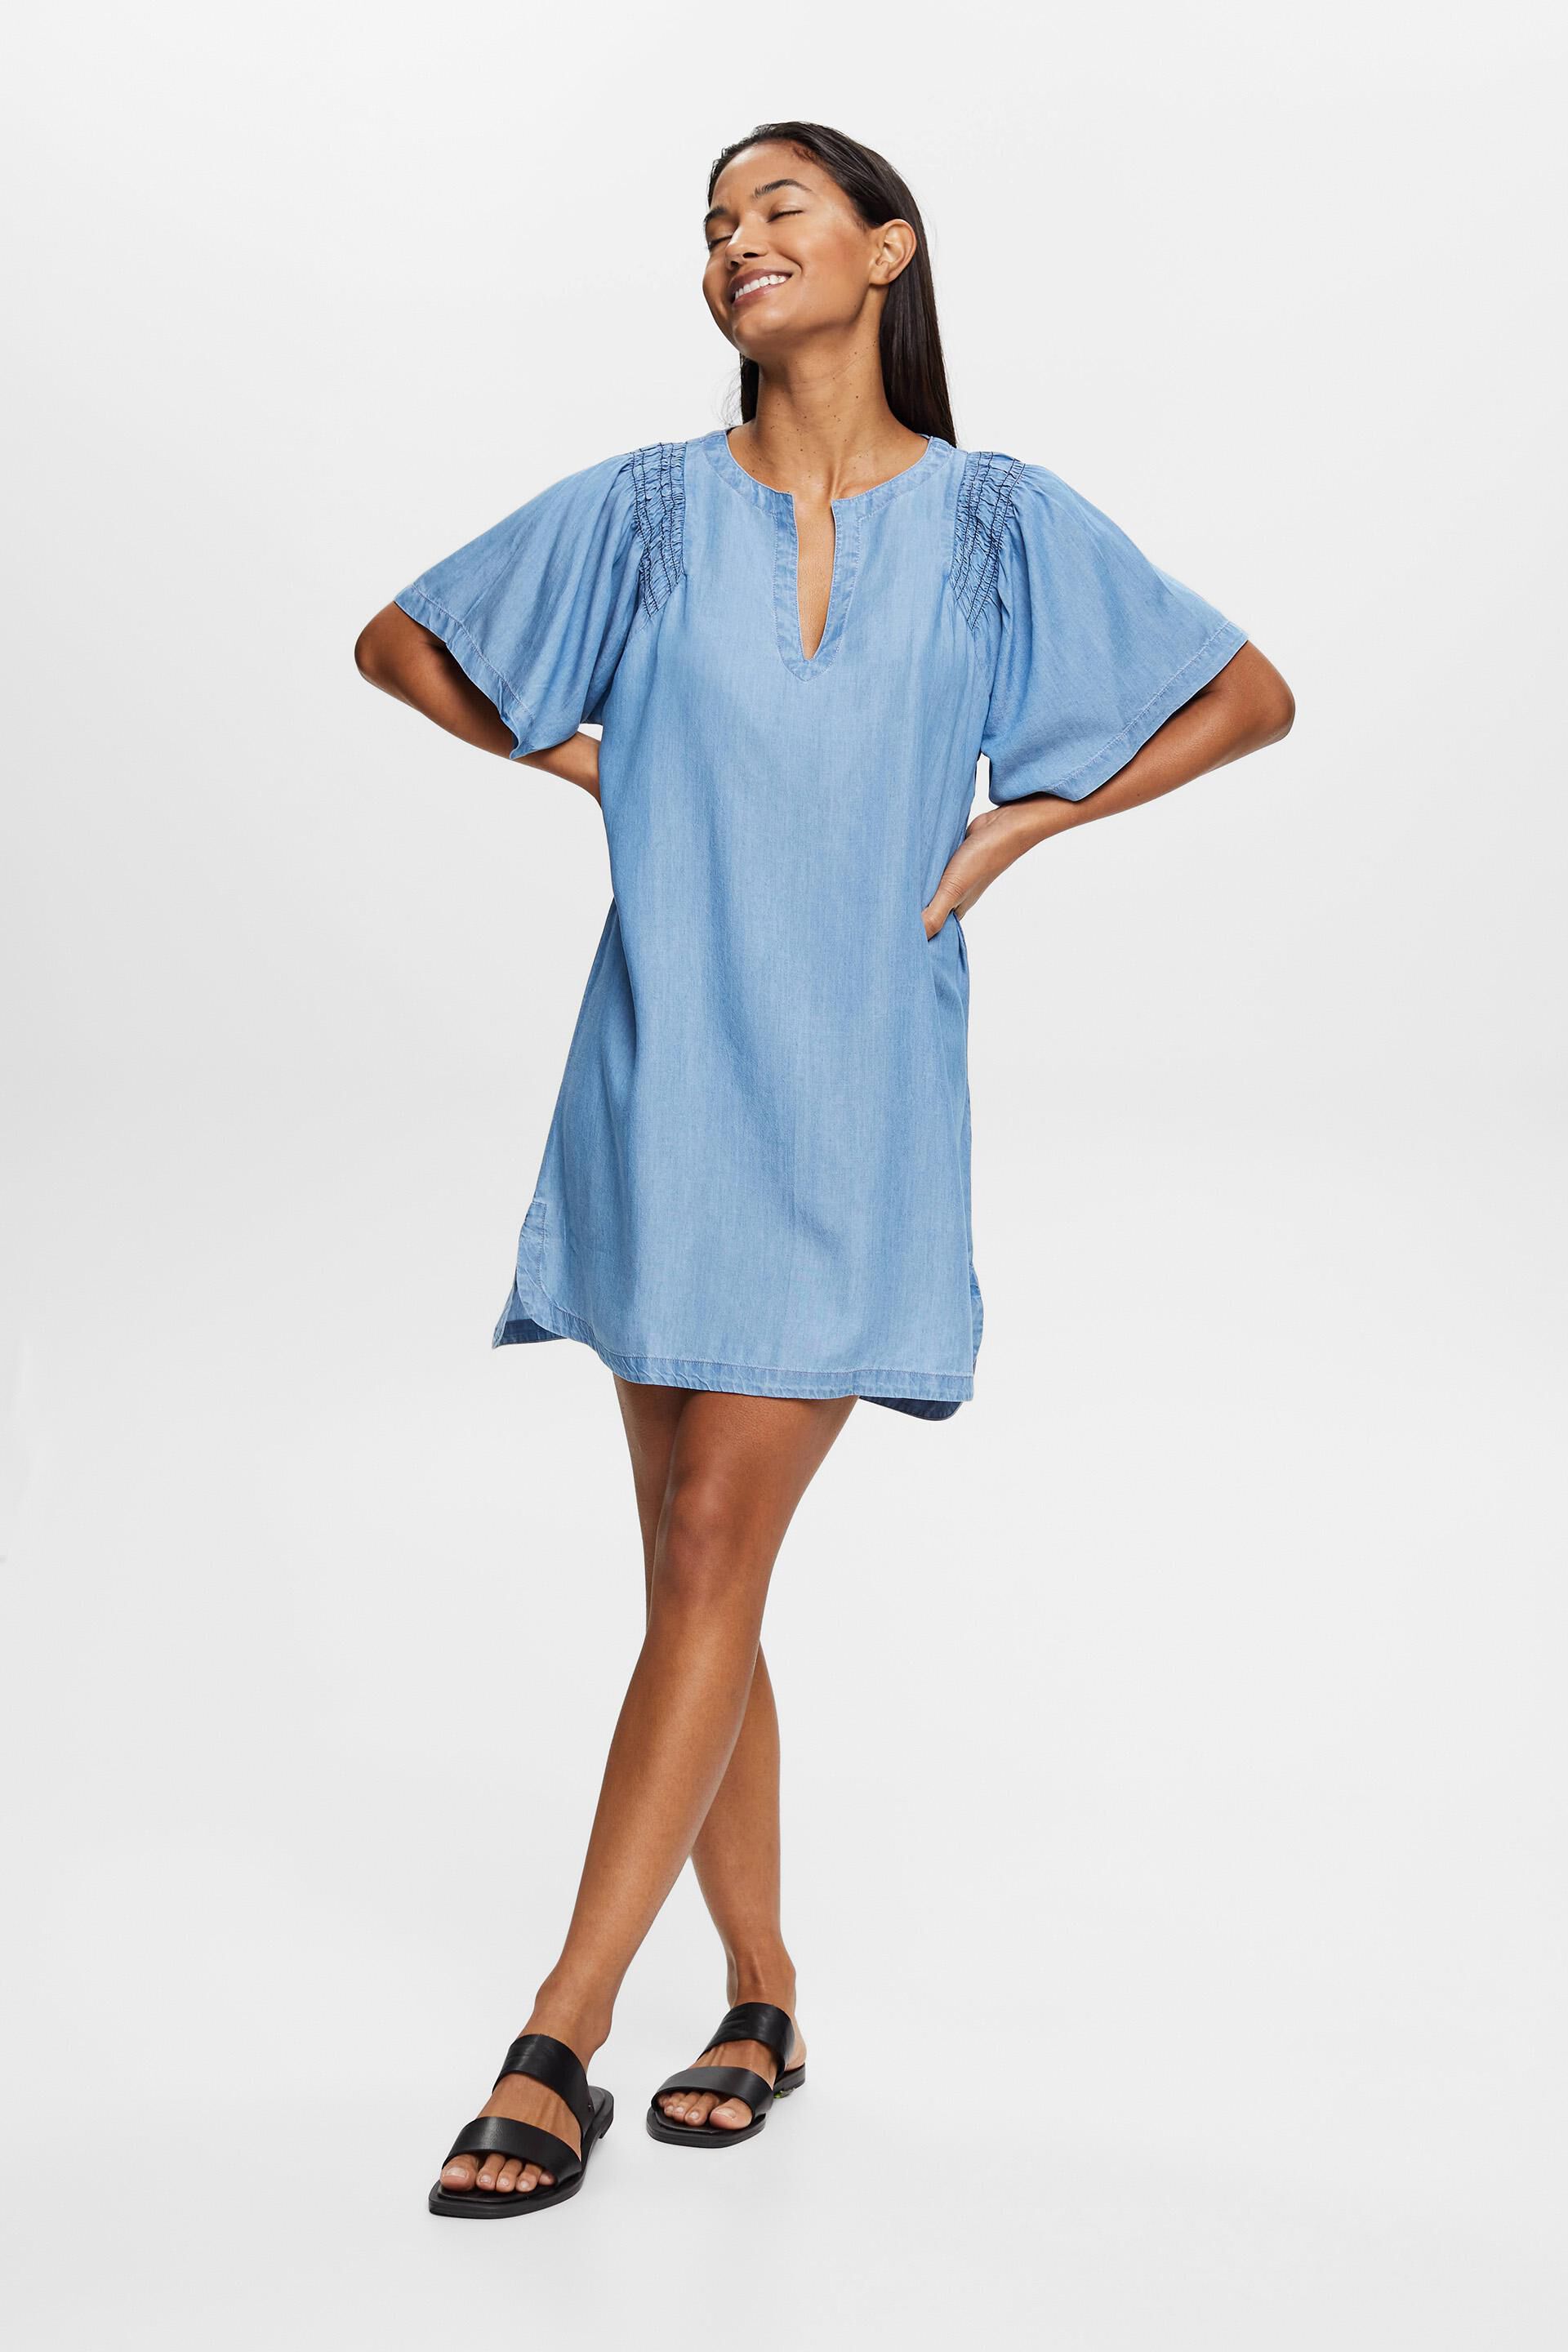 Touch of Cool Denim Tunic - Chico's